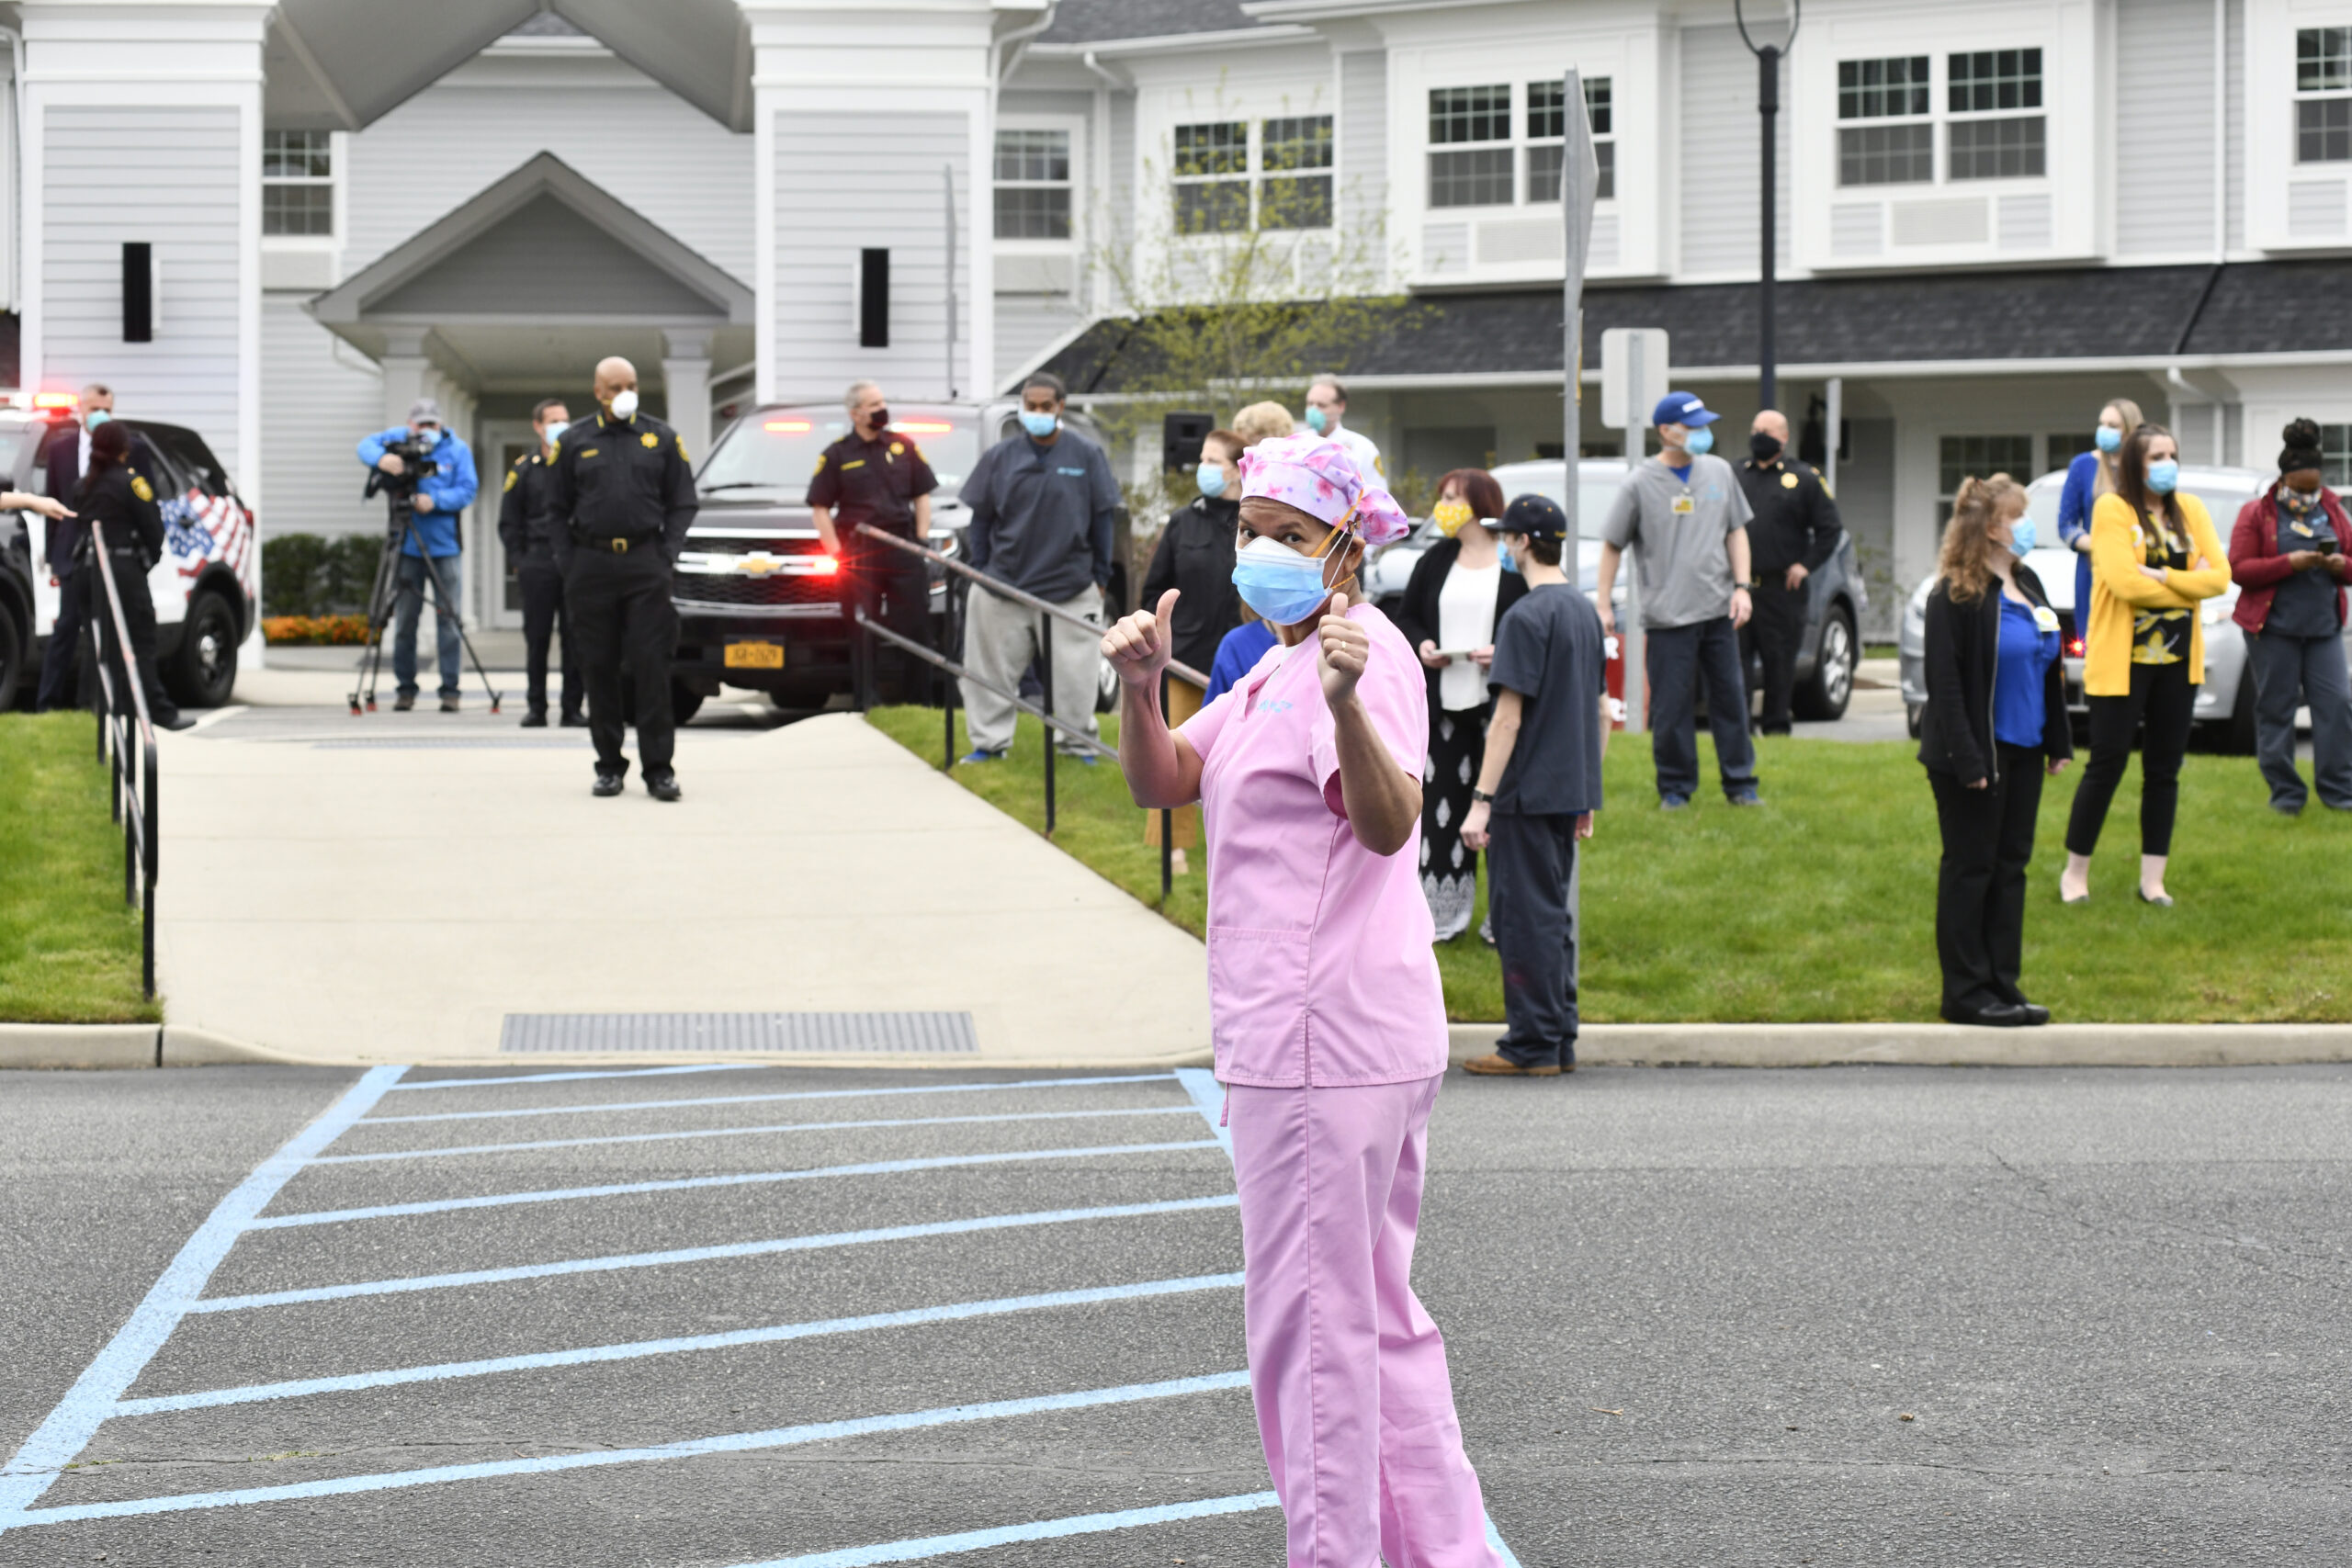 The Suffolk County sheriff’s office held a “Thank You Parade” for healthcare workers at The Villa At Westhampton on April 29, 2020.   DANA SHAW